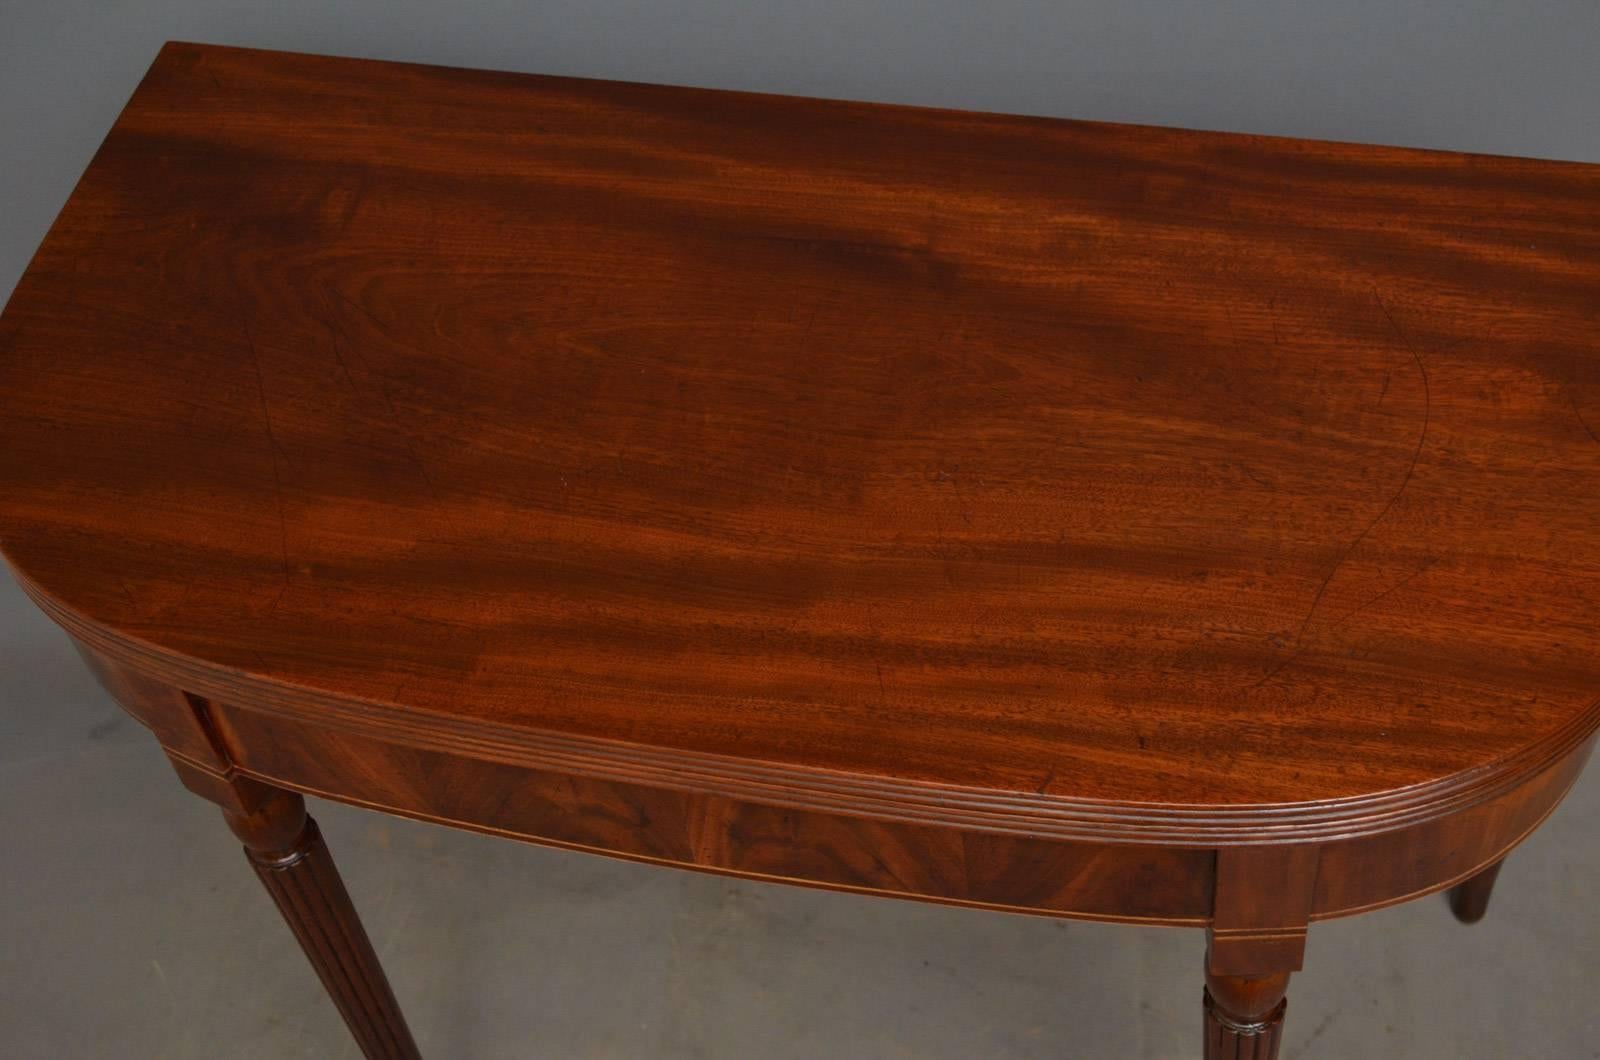 J00 elegant George III tea table in mahogany, having figured mahogany fold over top with reeded edge and flamed mahogany frieze with satinwood inlays, standing on slender, reeded and tapered legs. This antique table has been sympathetically restored